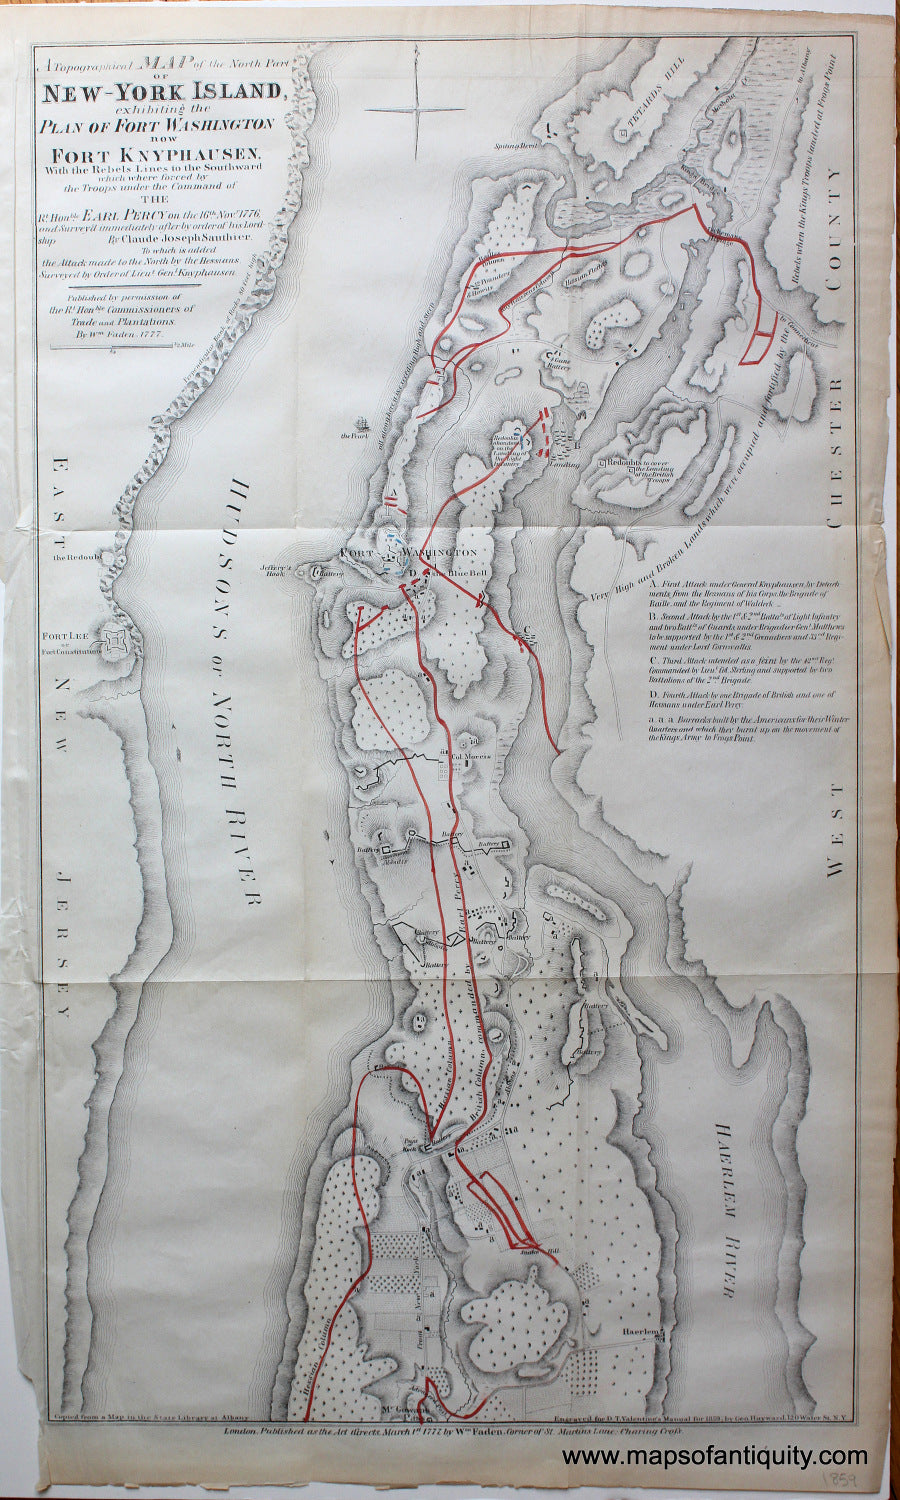 Antique-Black-and-White-Map-with-Hand-Colored-Accents-A-Topographical-Map-of-the-North-Part-of-New-York-Island-exhibiting-the-Plan-of-Fort-WashingtonÃ¢â‚¬Â¦-**********-United-States-New-York-1859-copy-of-a-1777-map-Engraved-by-George-Hayward-for-D.T.-Valentine's-Manual-Maps-Of-Antiquity